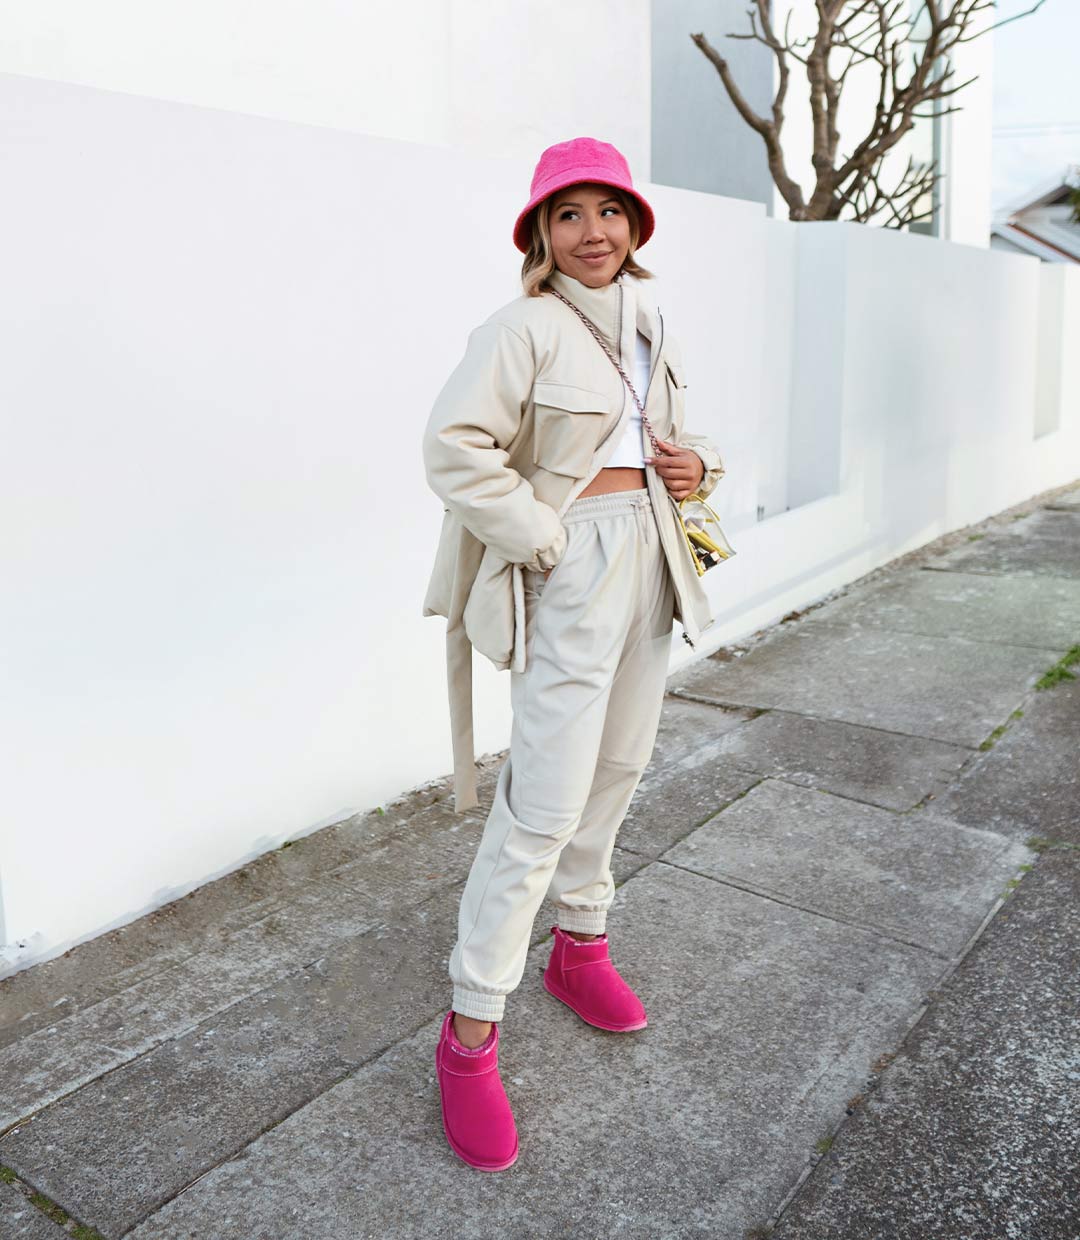 Influencer standing in street wearing beige co-ord ourfit and bright pink bucket hat and boots